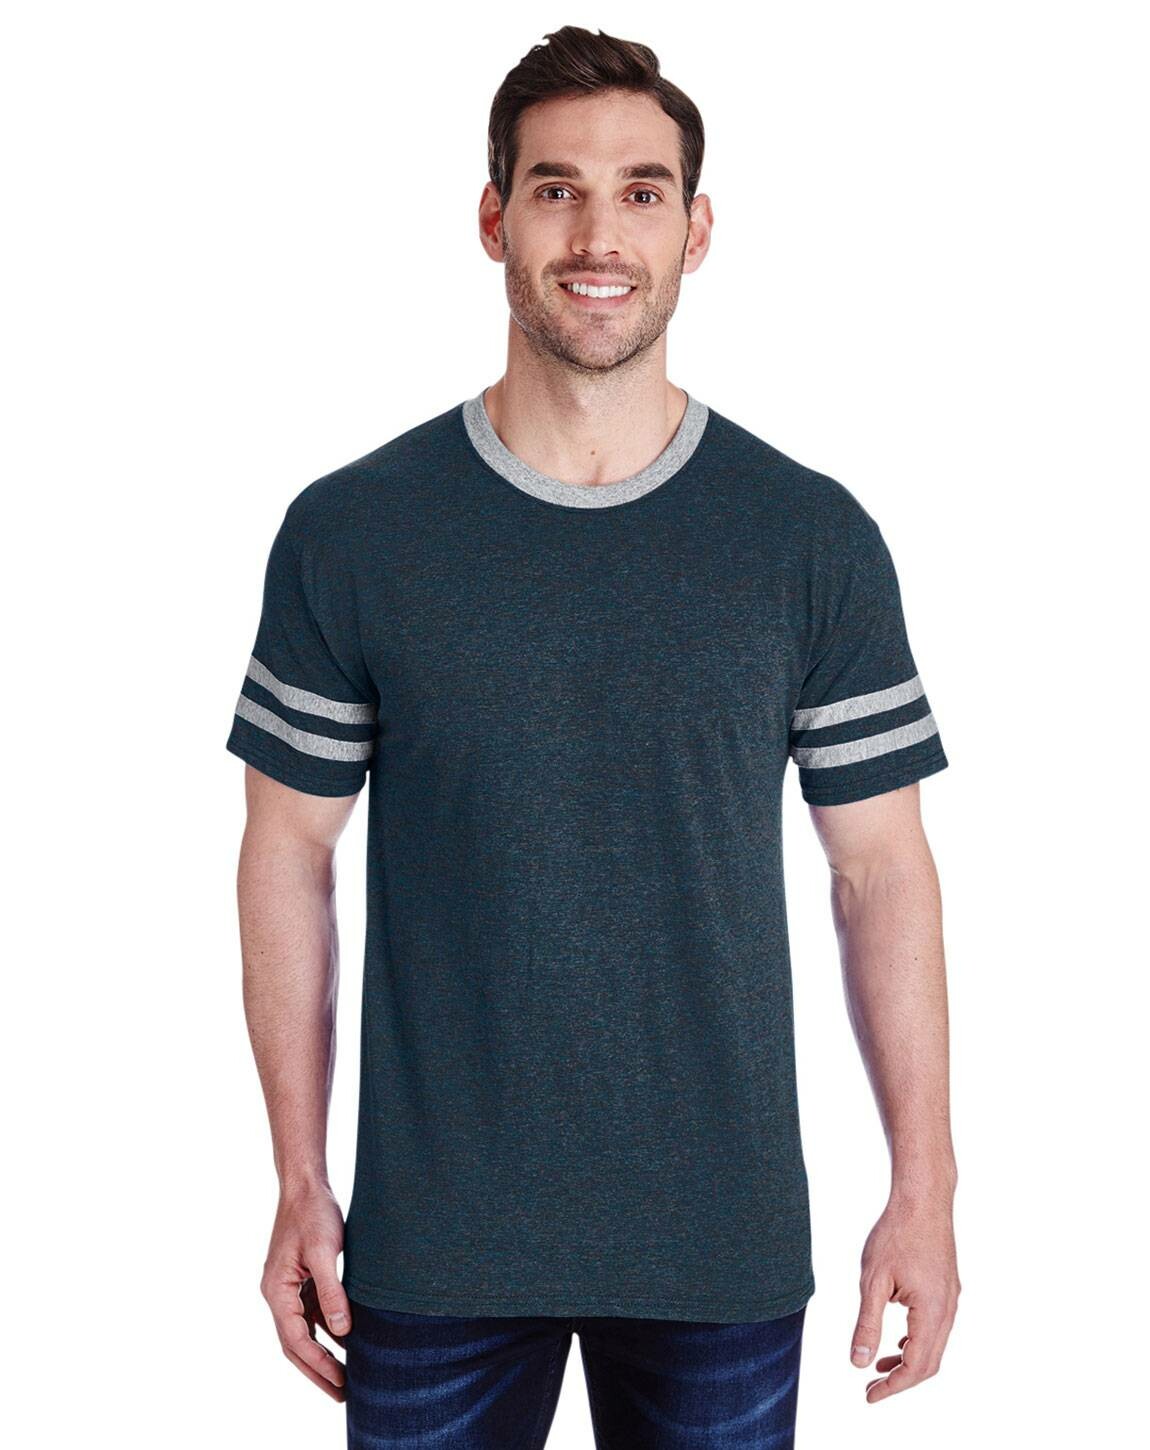 Ringer Tee Blank T Shirts for Men Crew Neck Triblend Performance